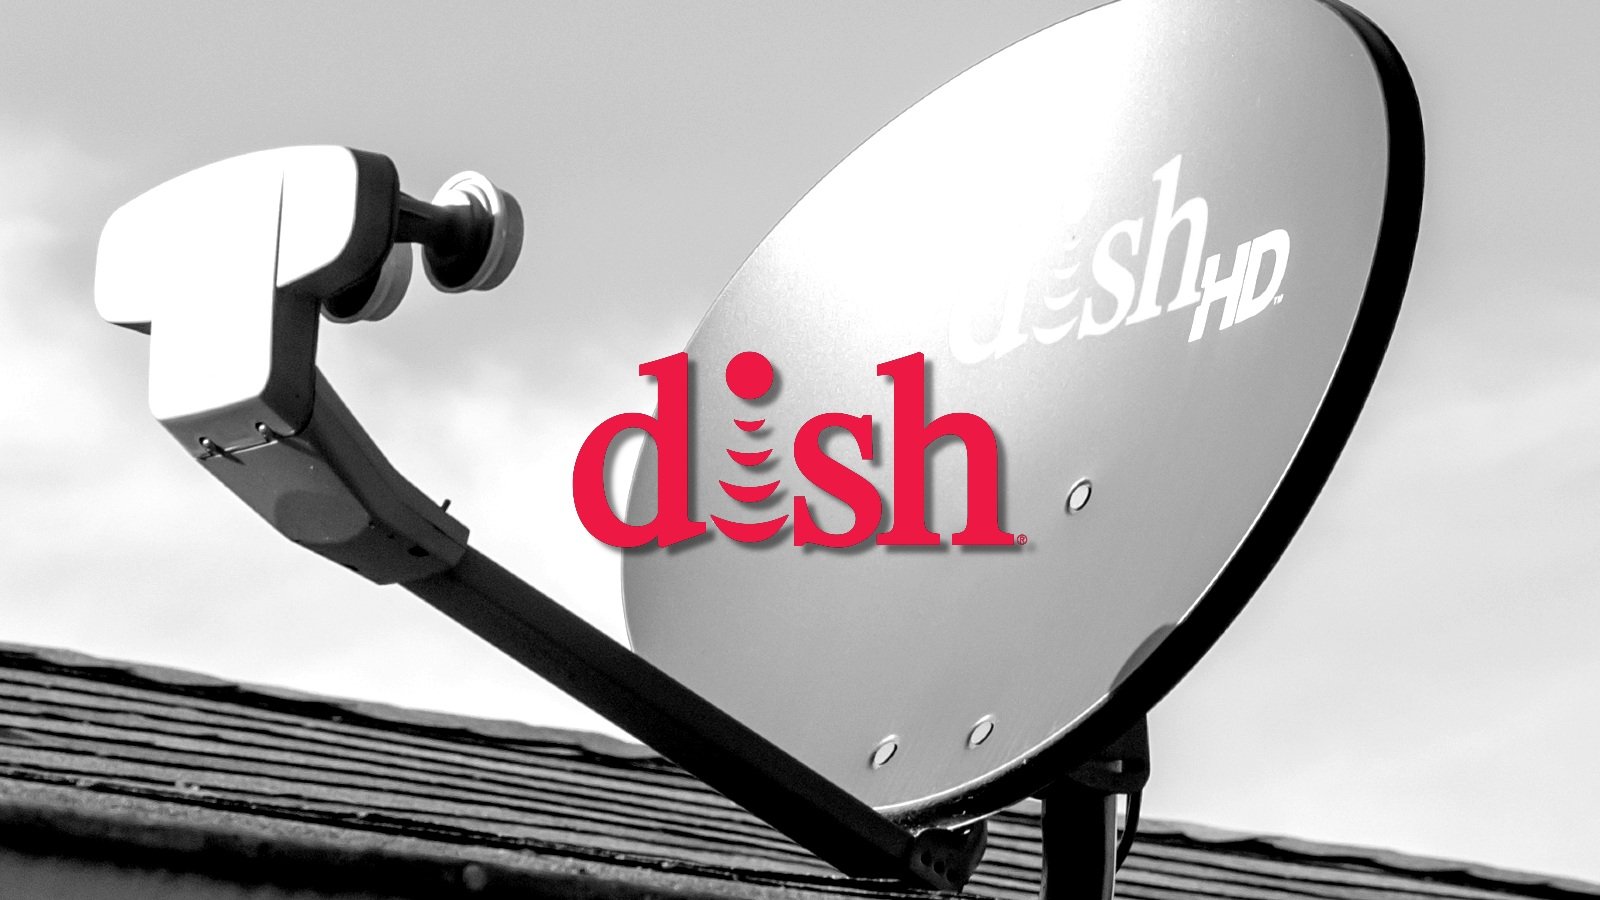 Dish Network confirms ransomware attack behind multi-day outage